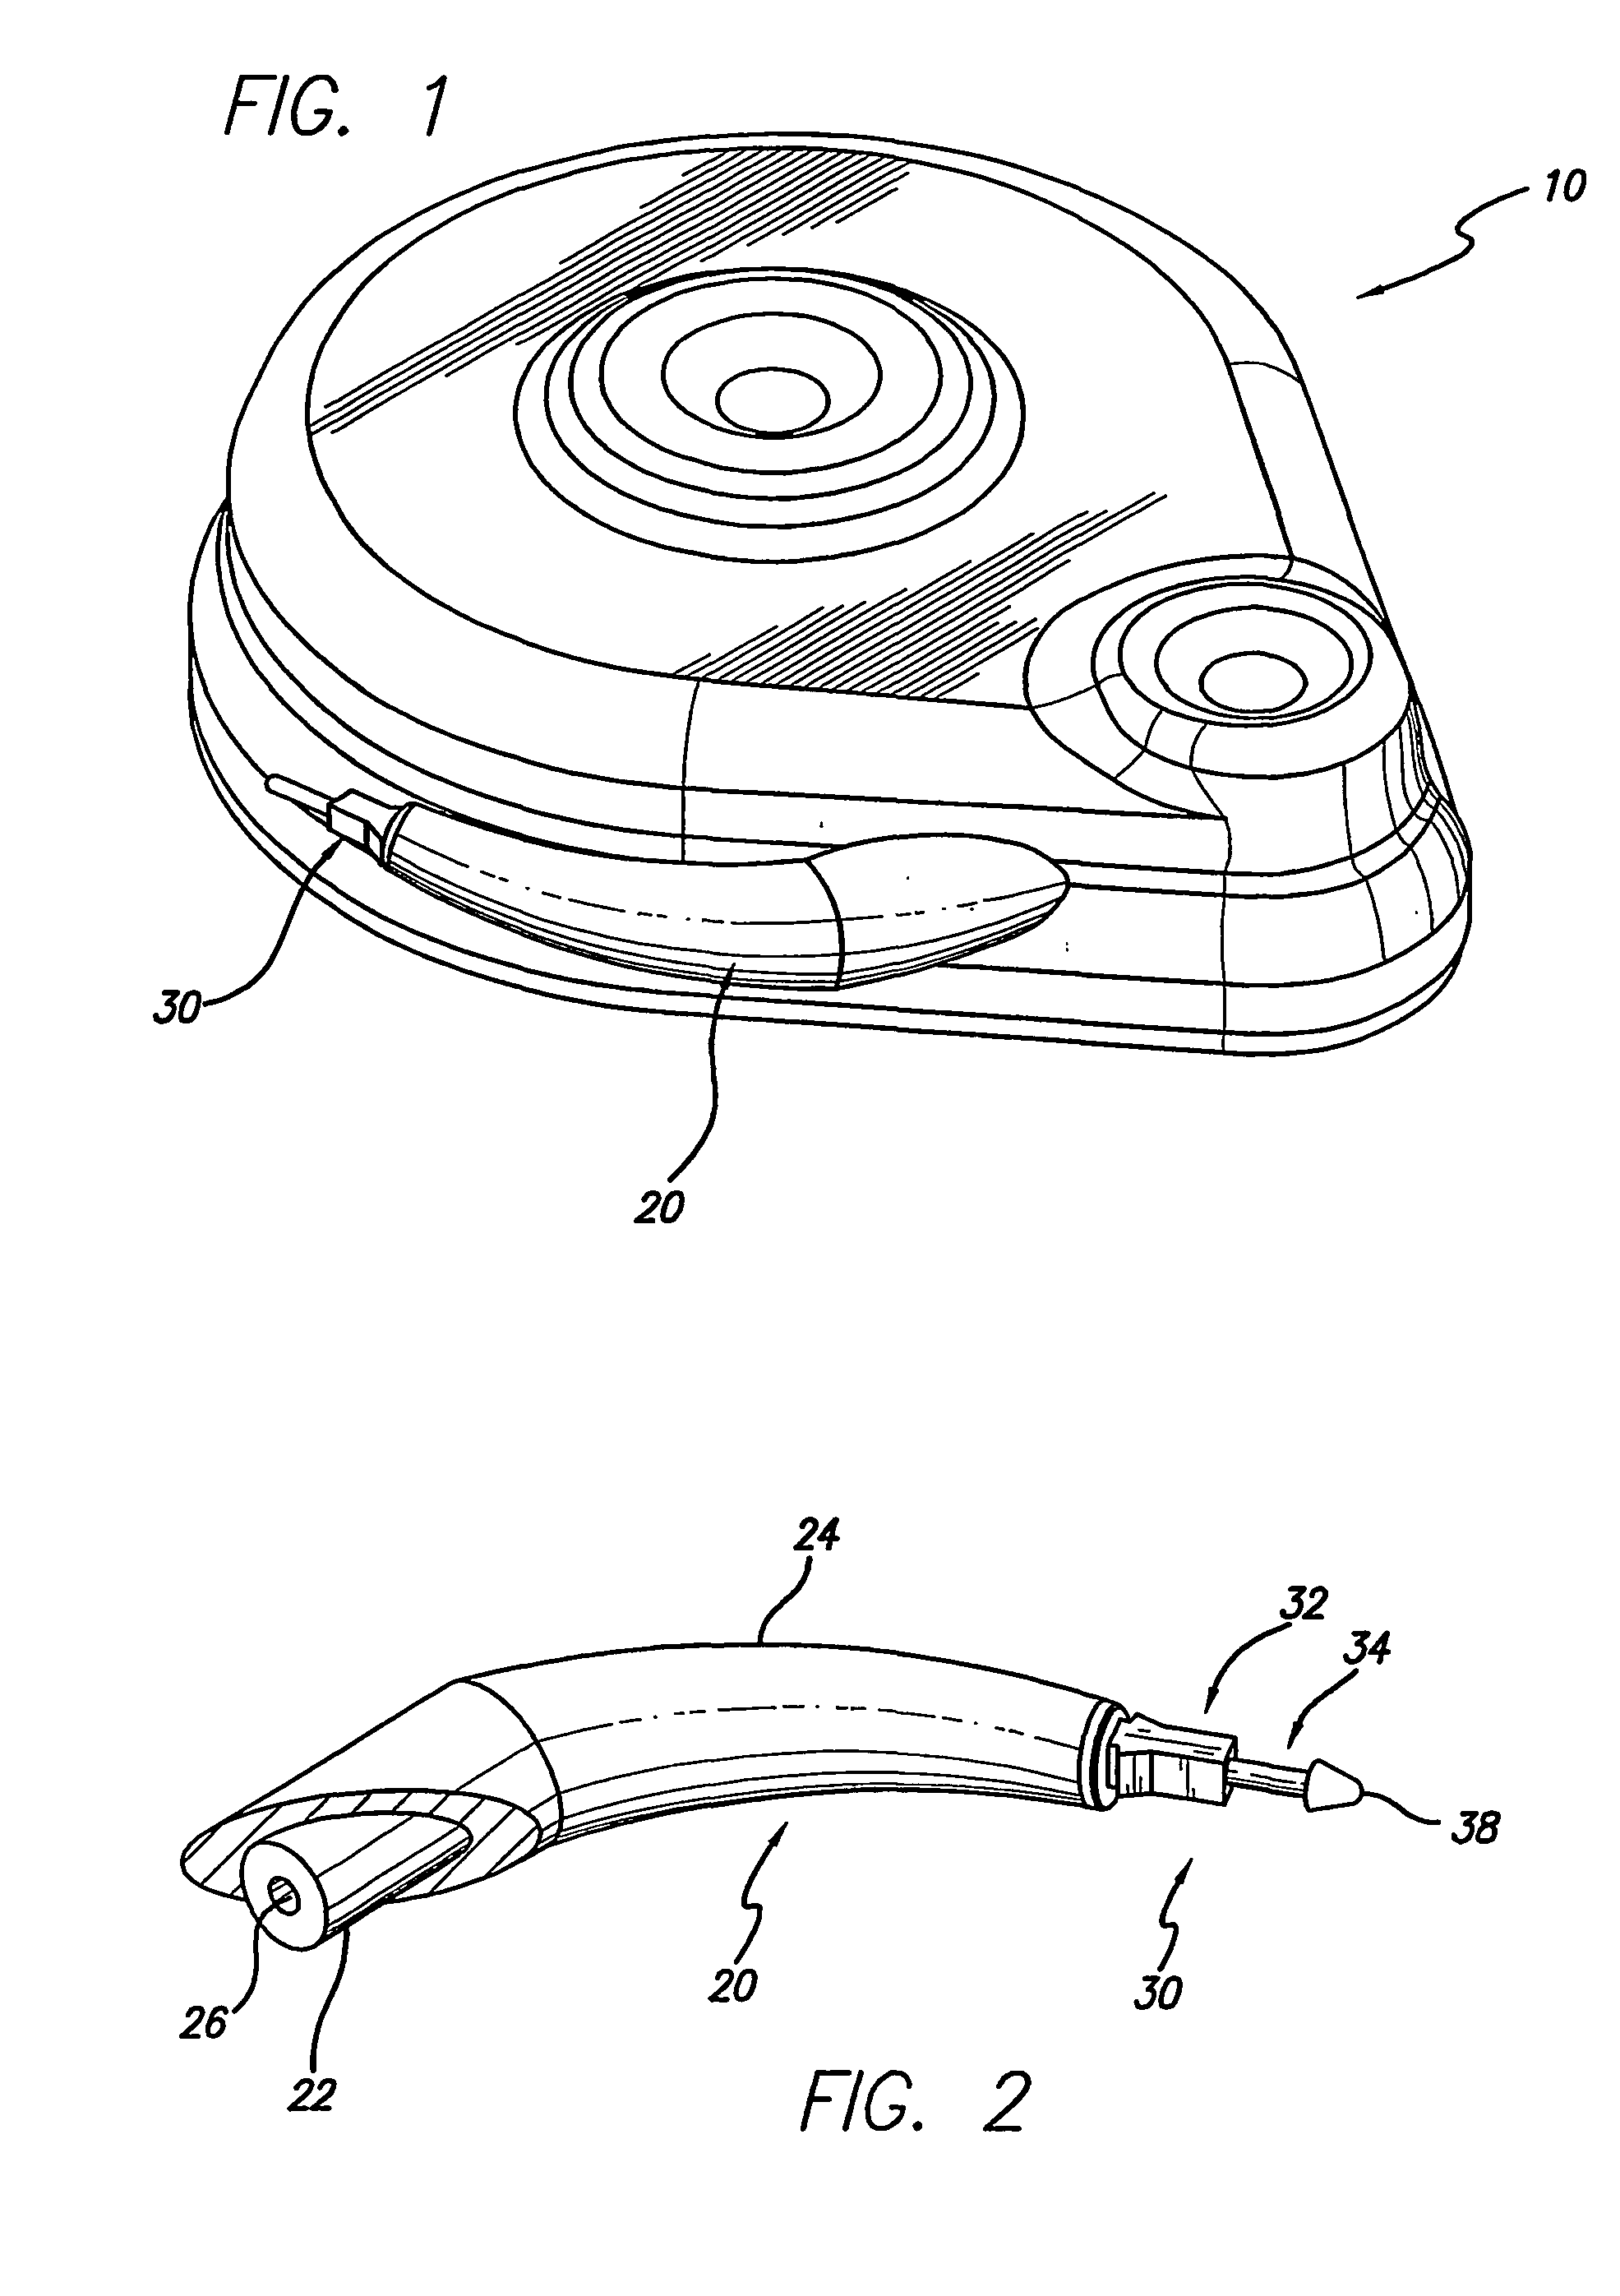 Connector for catheter attachment to an implantable pump